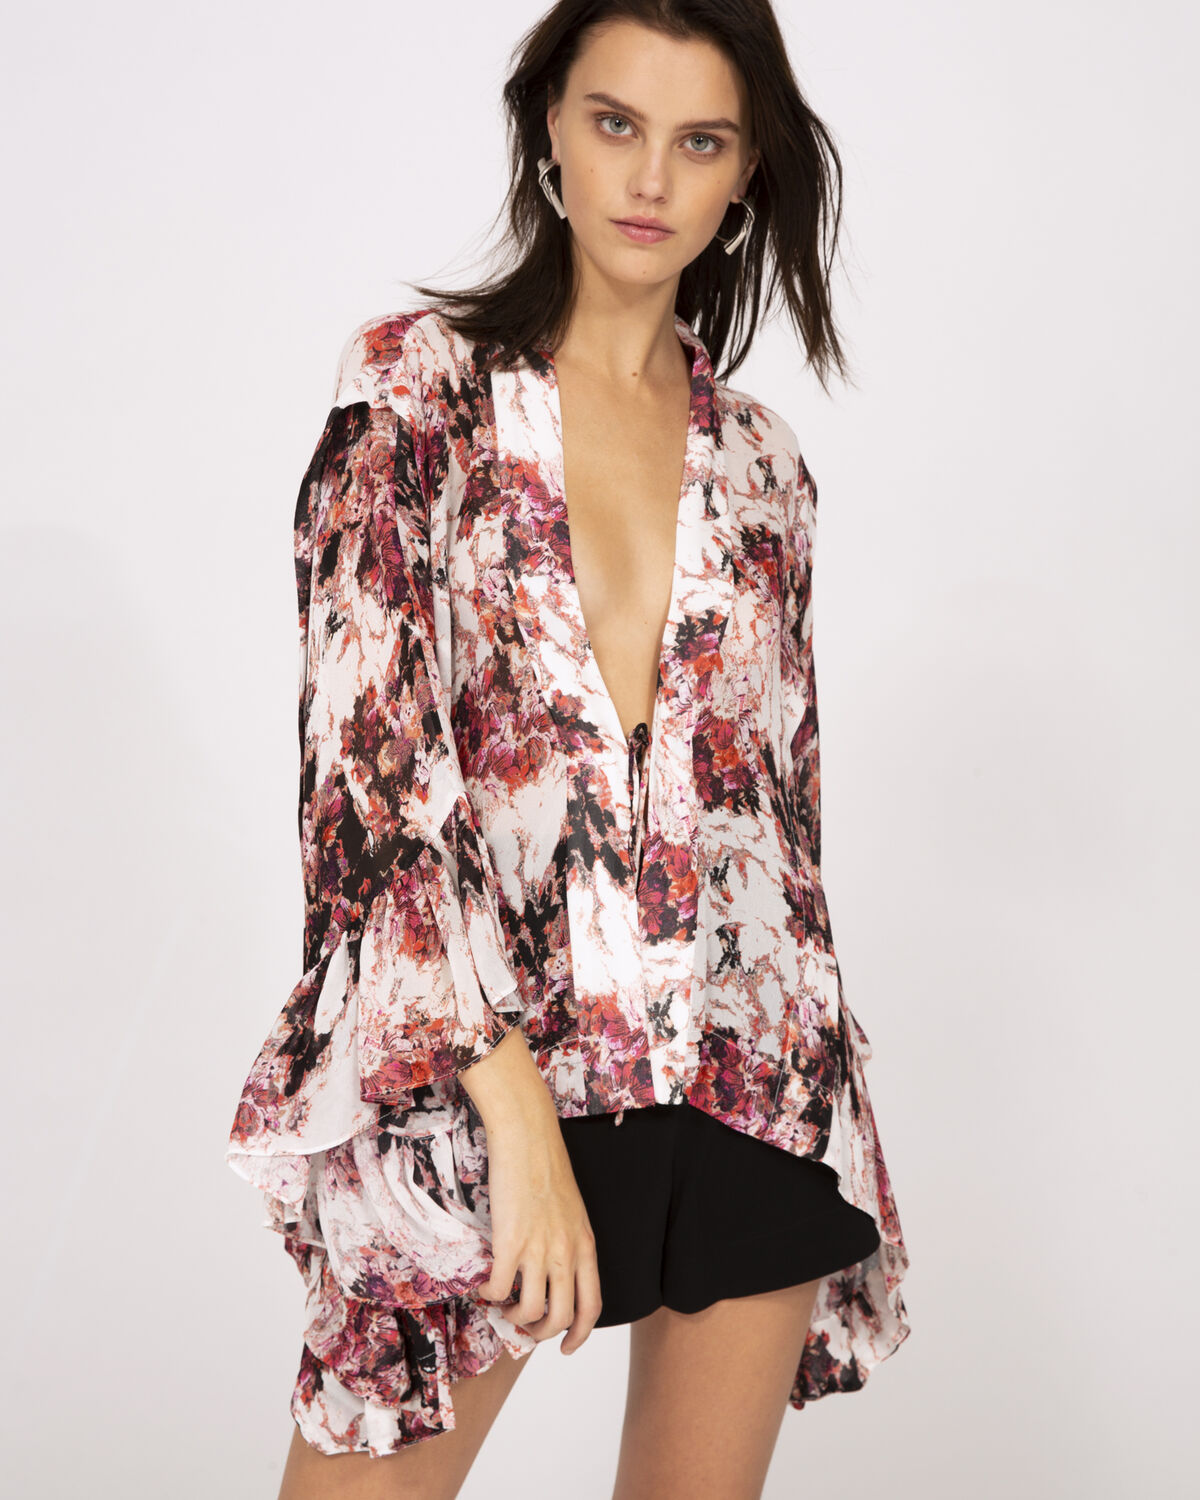 Photo of IRO Paris Ideal Top Ecru - This Oversized Top Is The Piece To Have This Season. Kimono Sleeves, Colorful Print, Deep Neckline: This Is A Top That Will Enhance You! Shirts-Tops